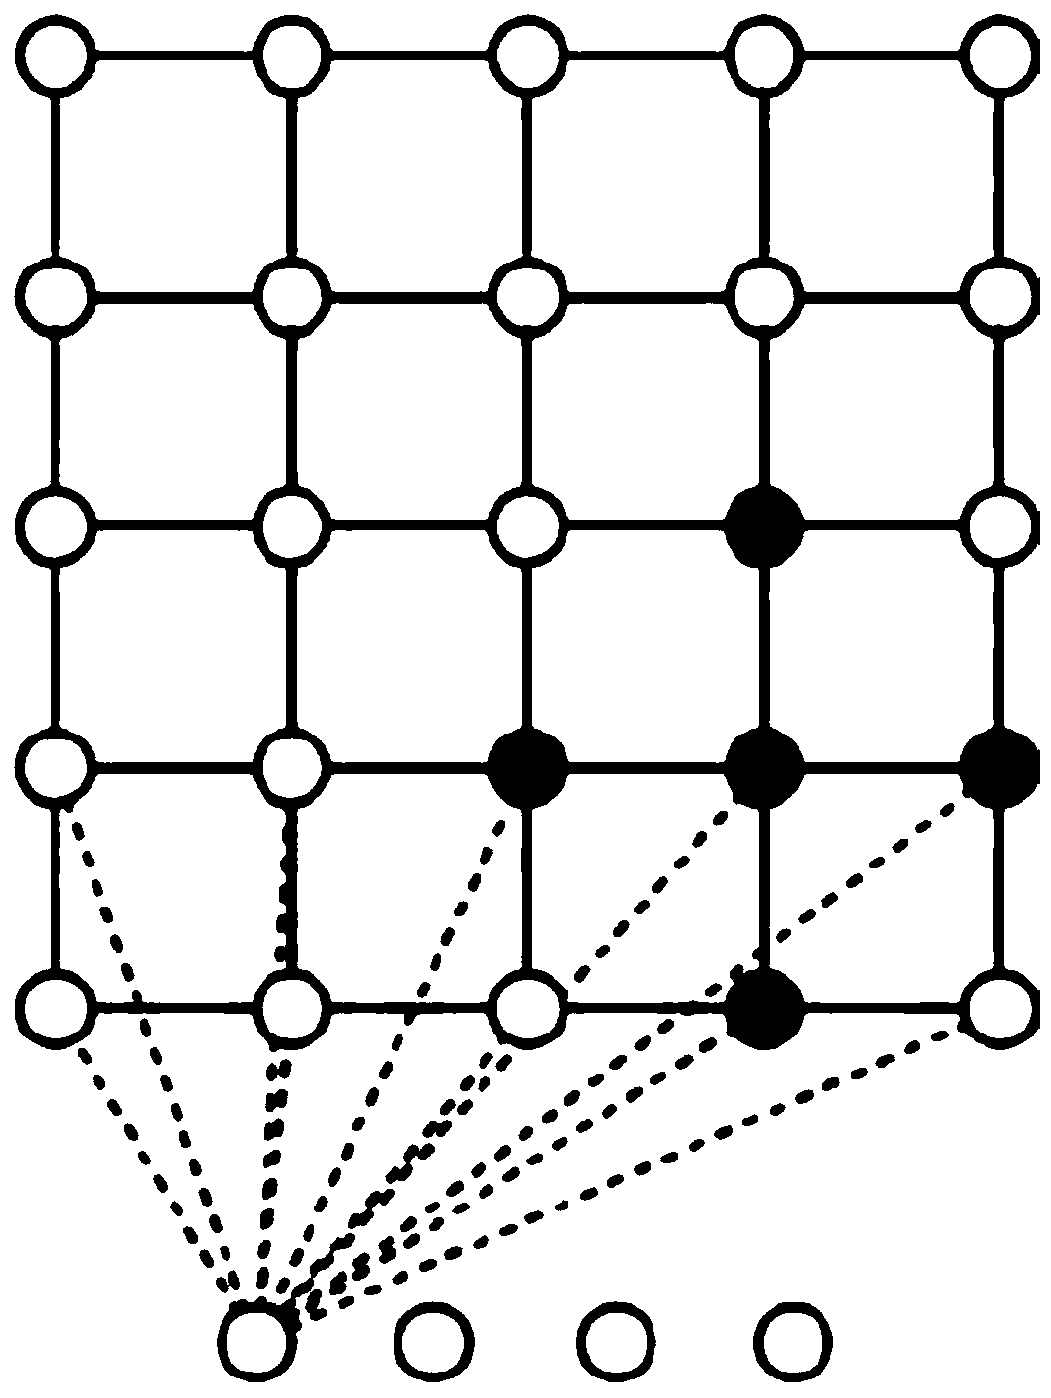 Multi-index anomaly detection method based on neural network